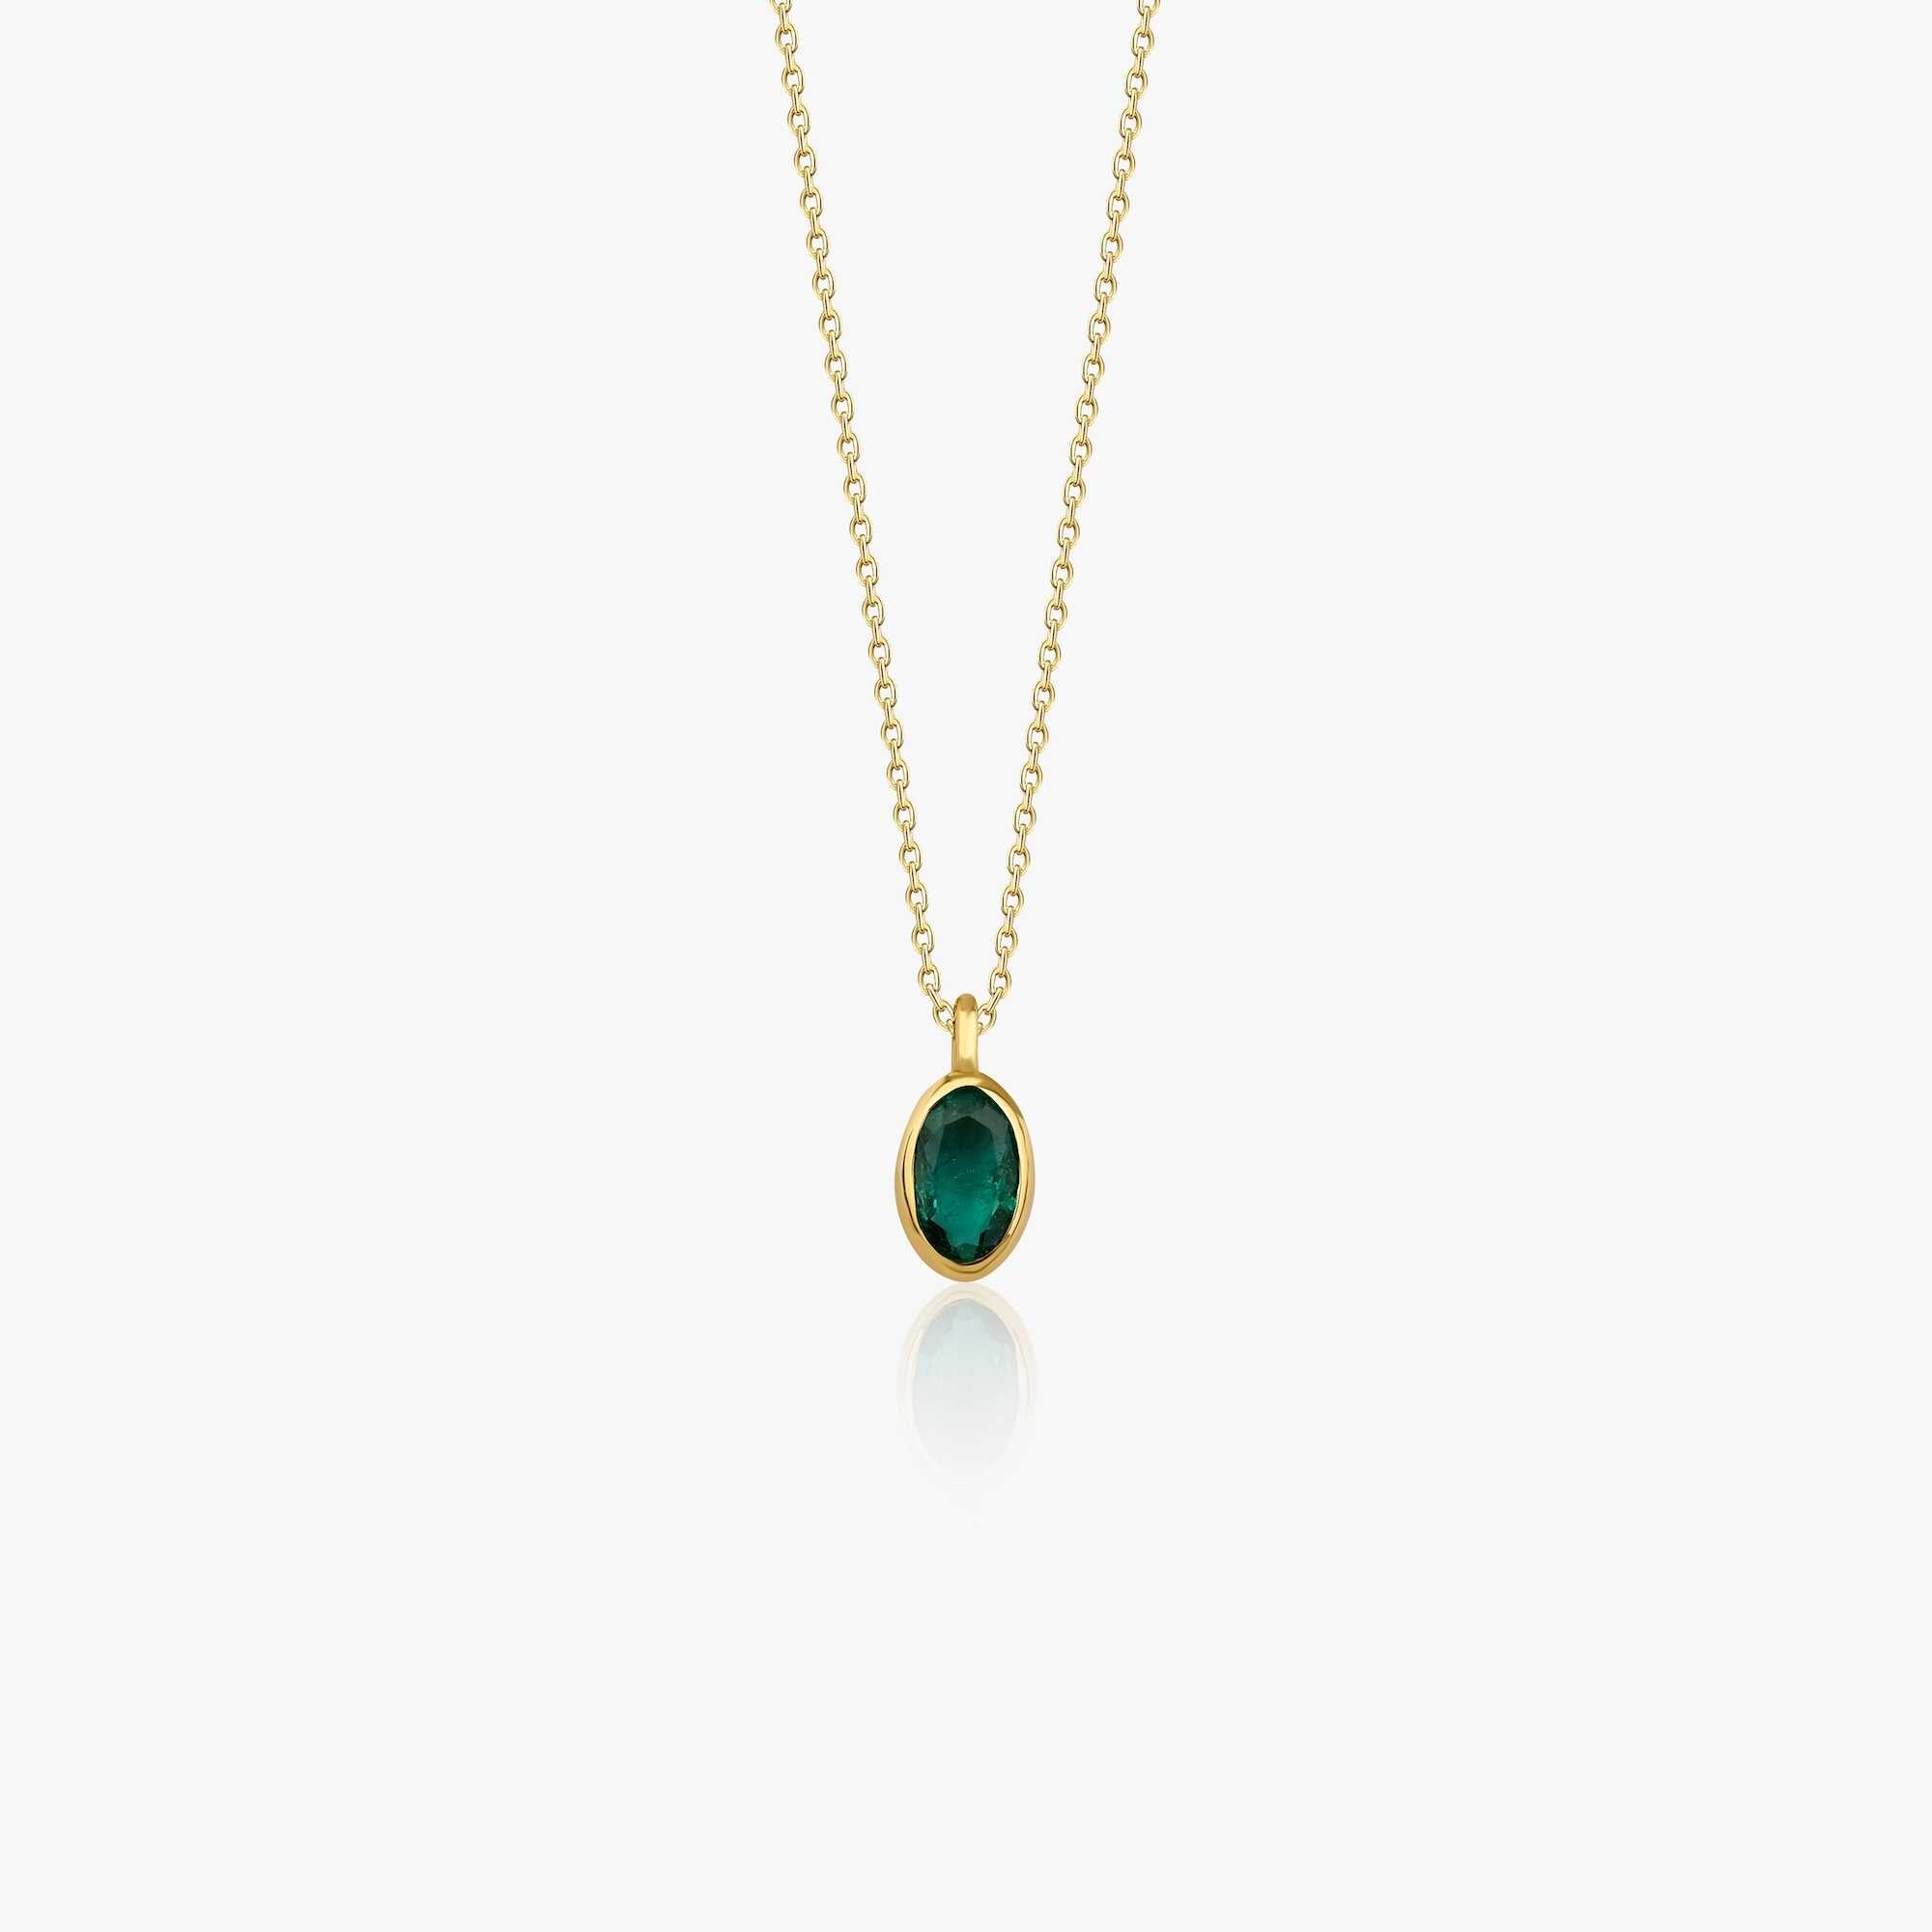 Oval Cut Emerald Solitaire Necklace Available in 14K and 18K Gold